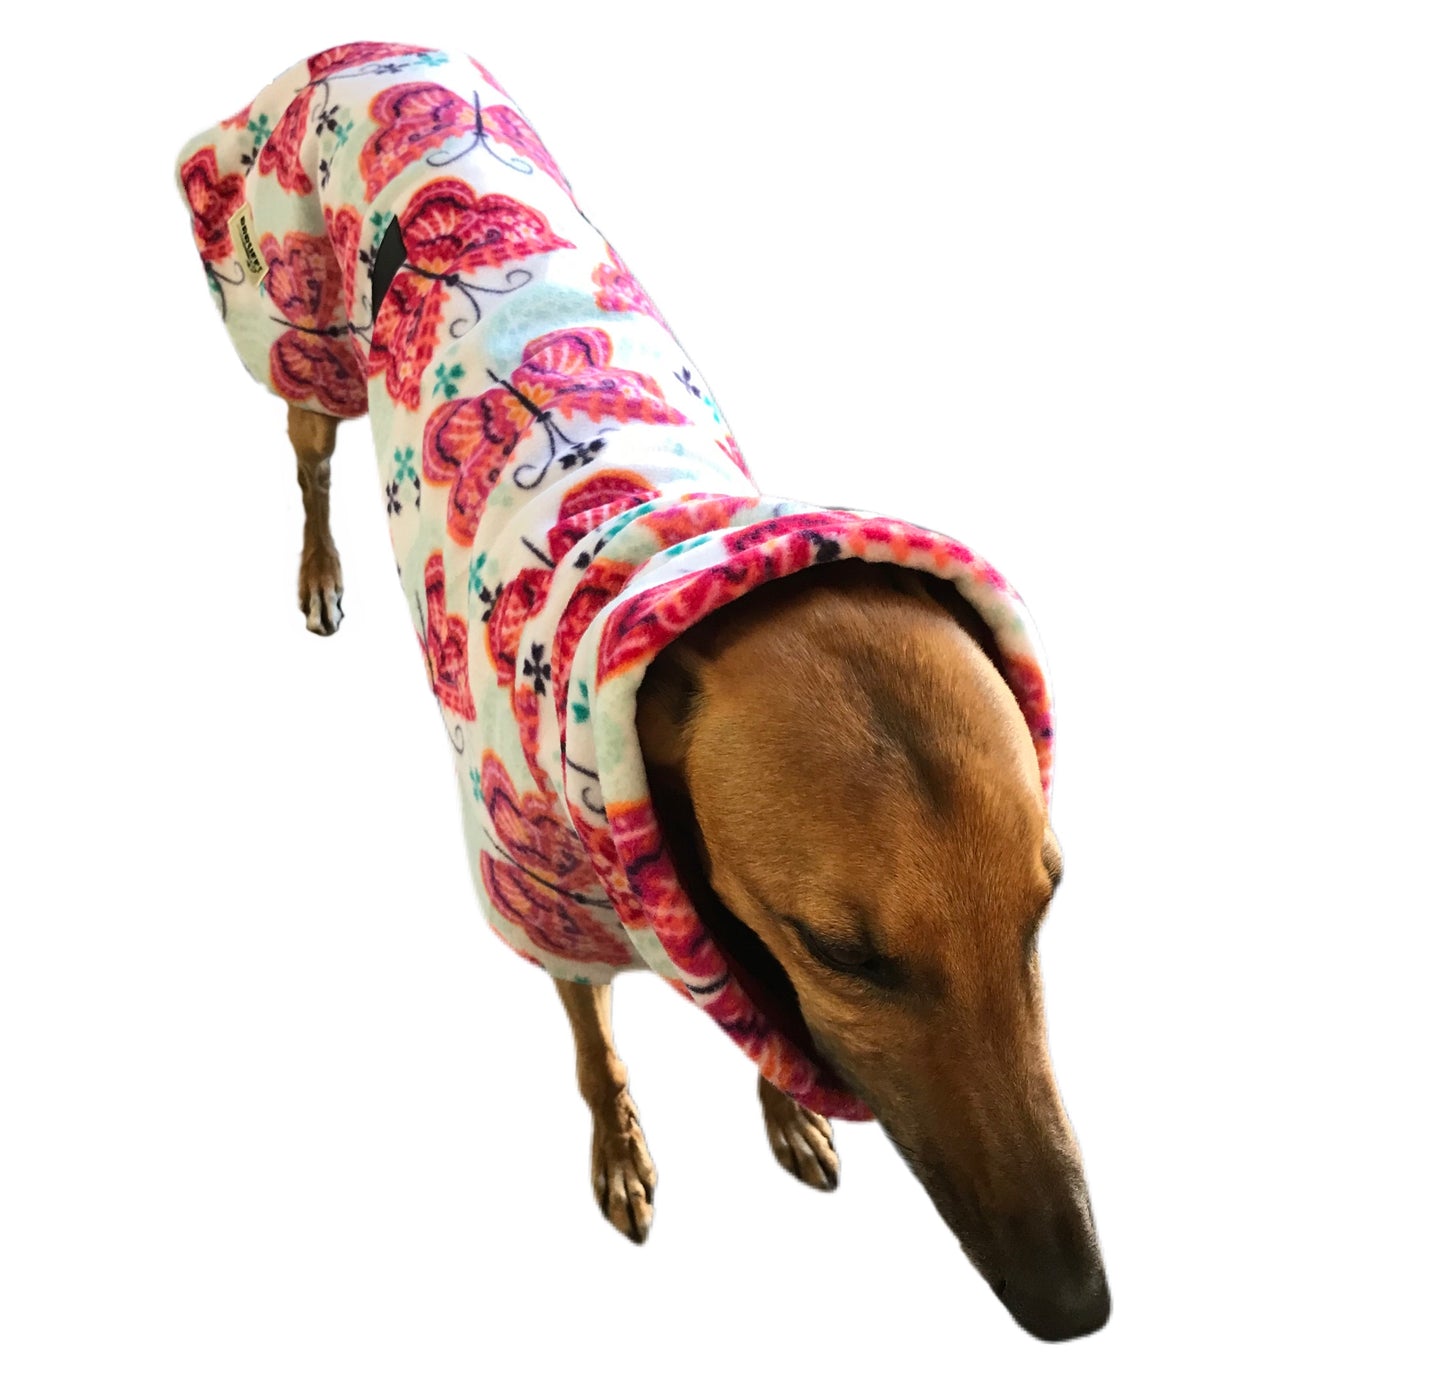 Butterfly prints greyhound Deluxe style coat rug super soft & snuggly polar fleece extra wide neck hoodie end of line